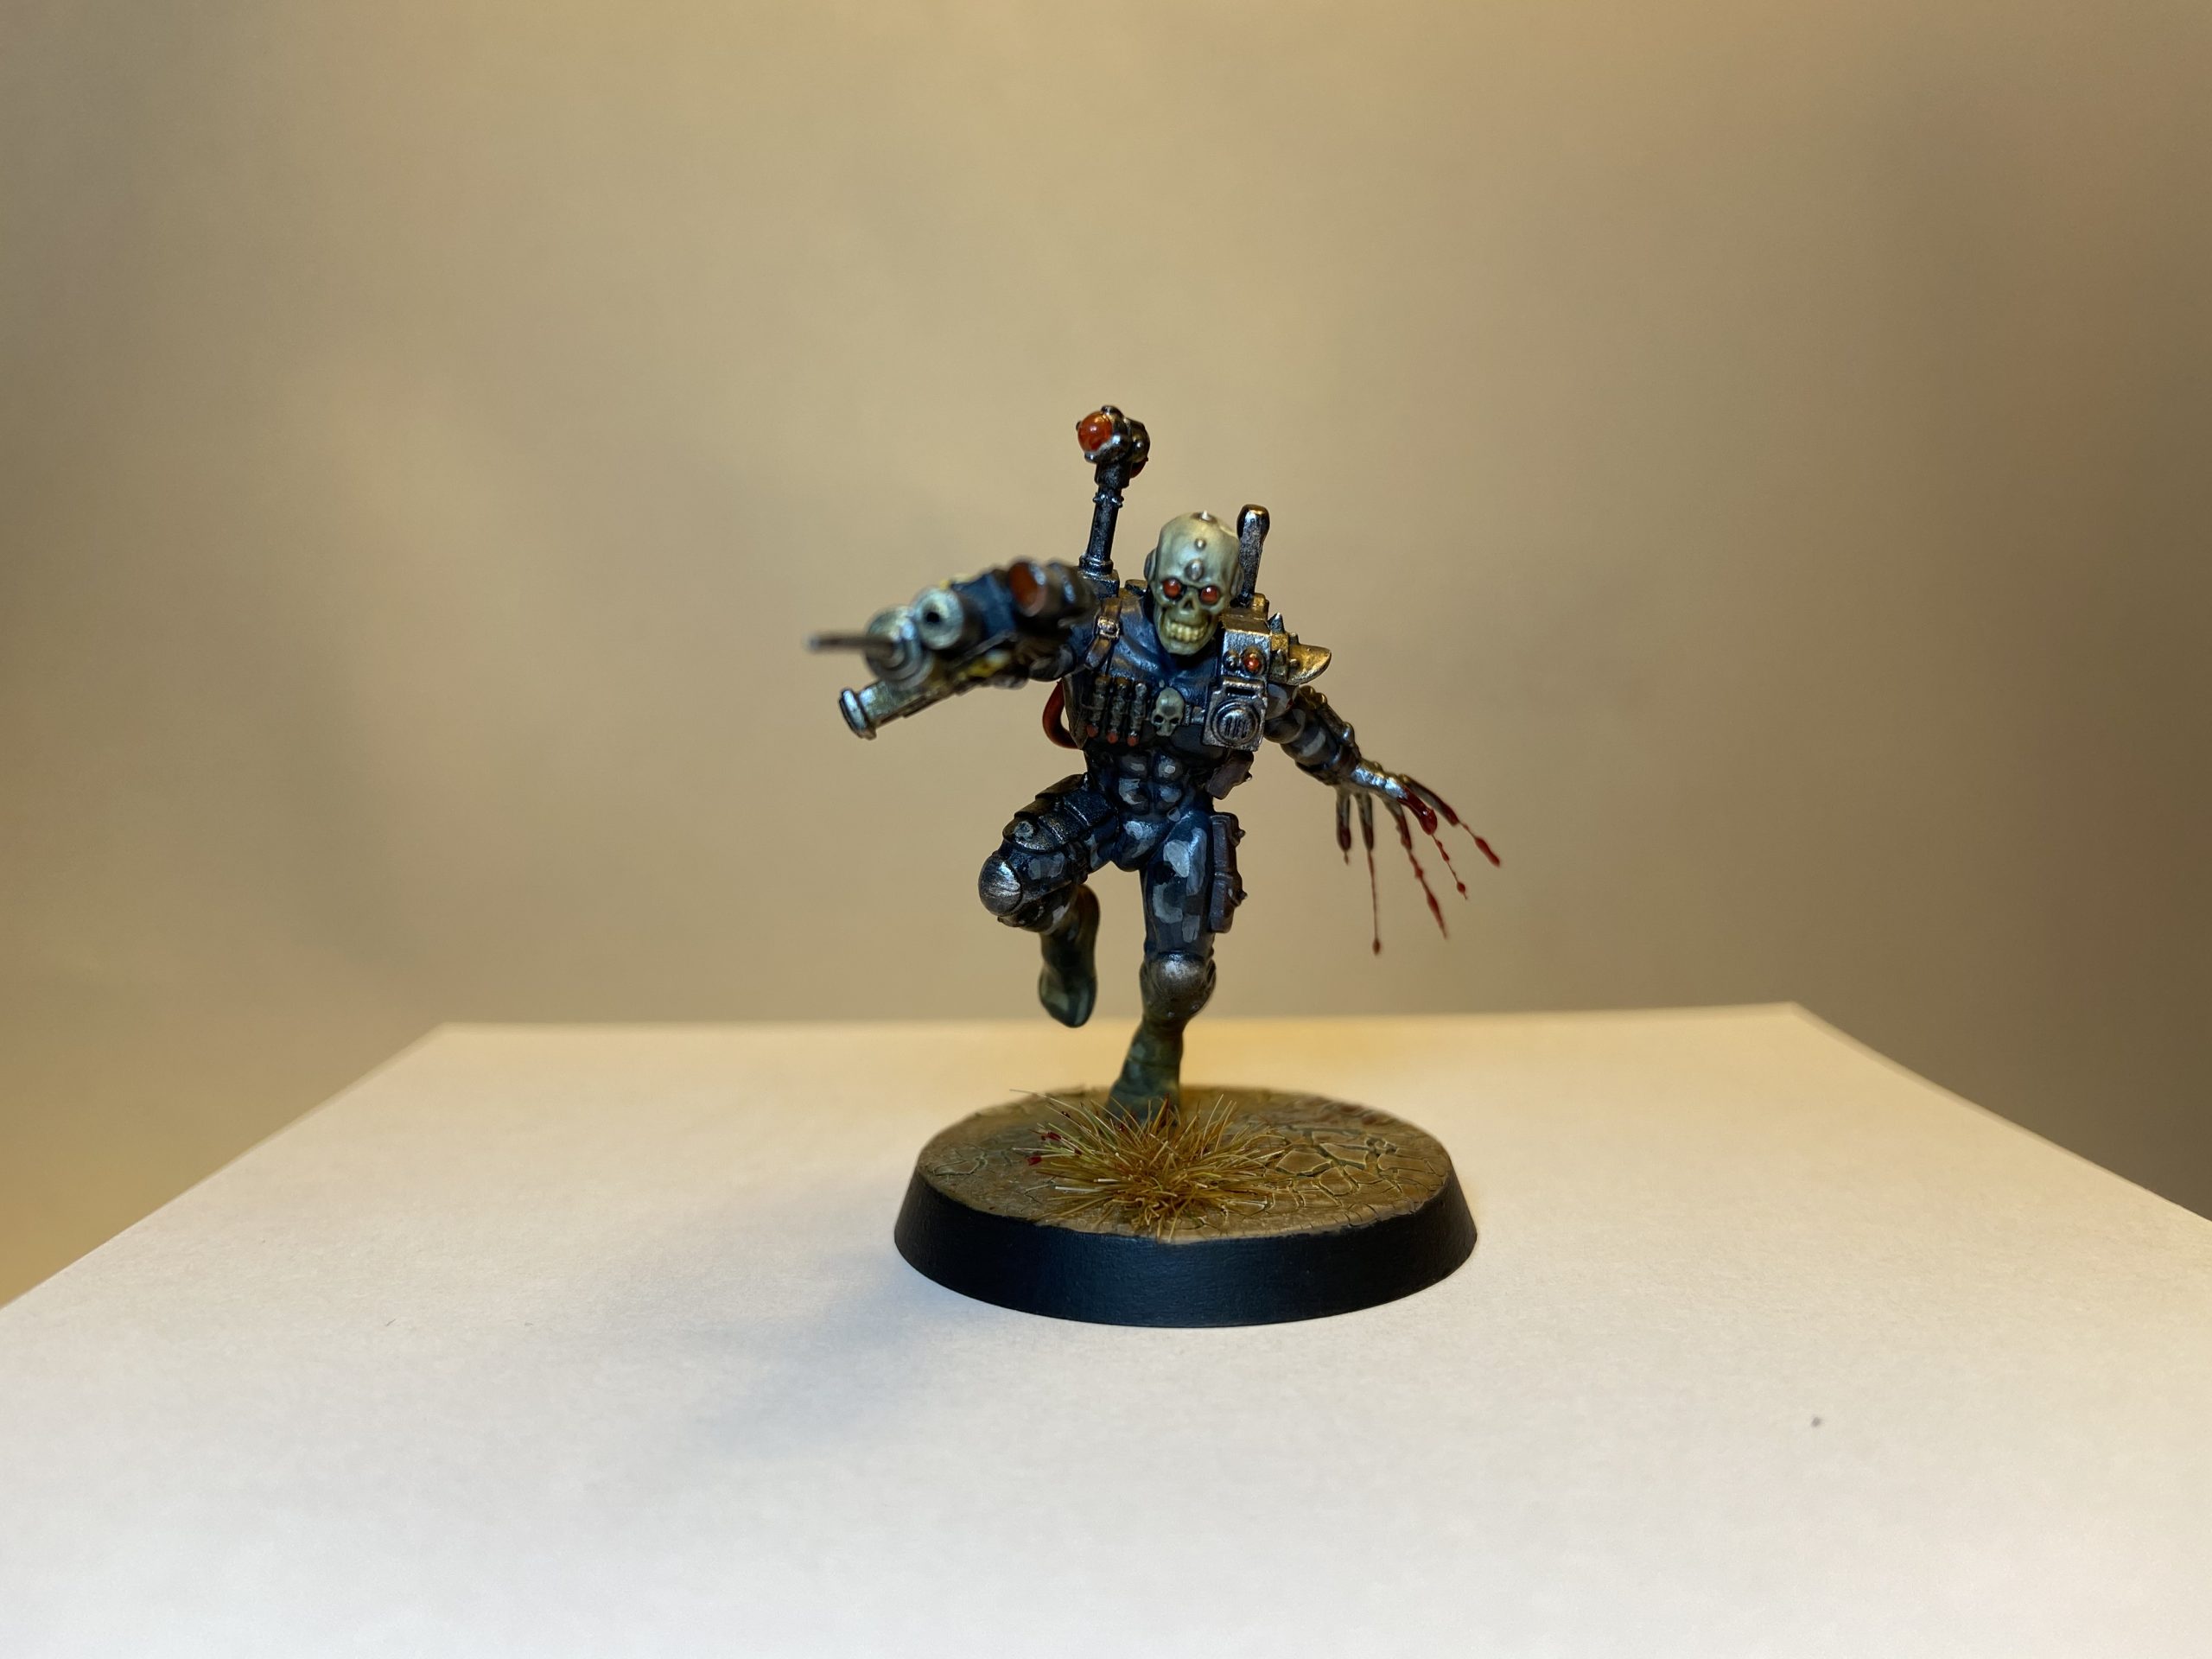 Warhammer 40,000 Eversor Assassin commission painted.